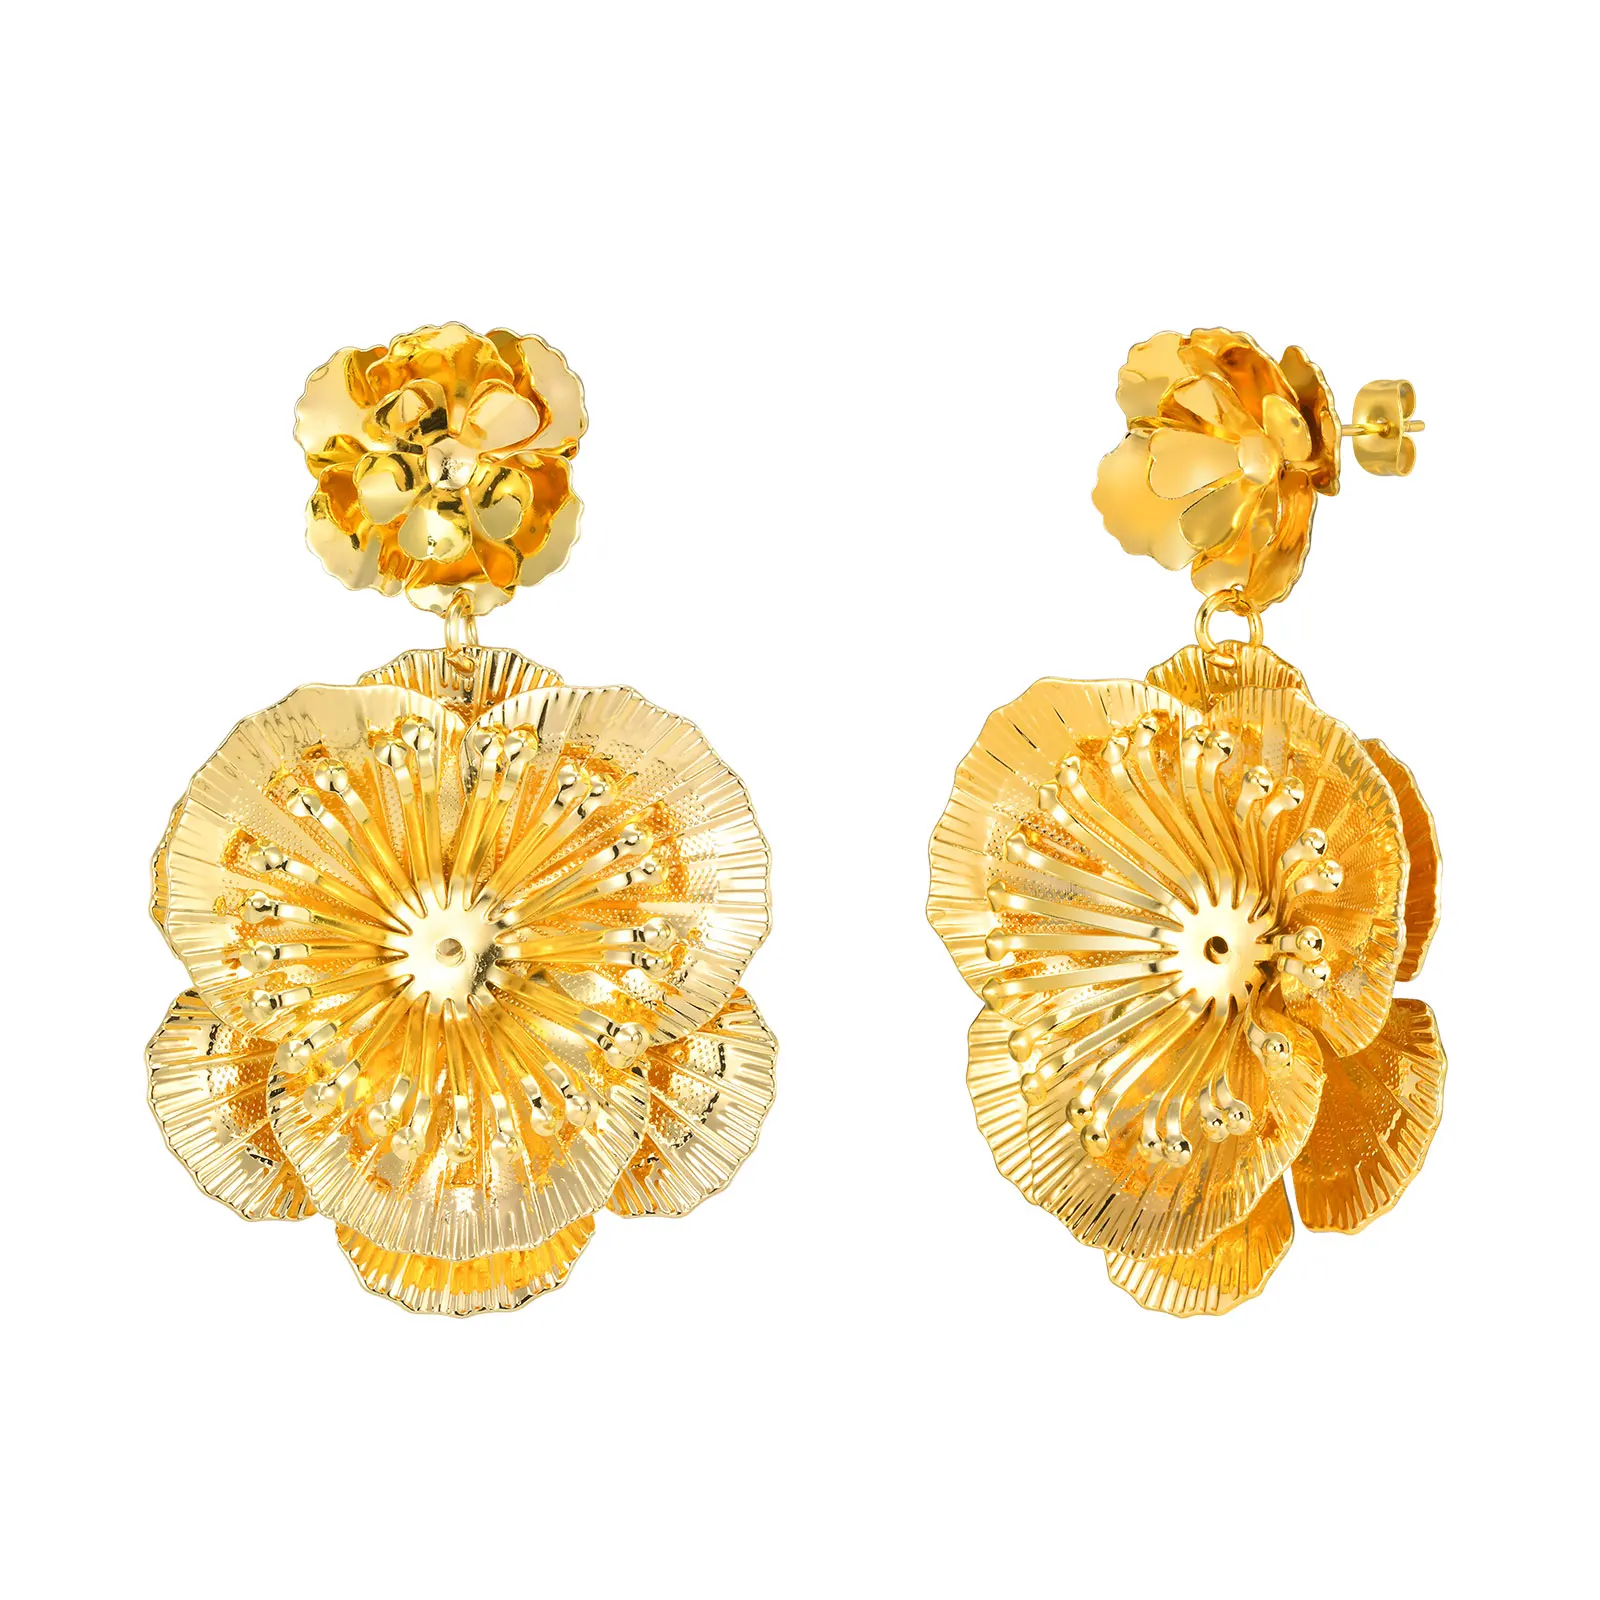 18k Gold Plated Statement Flower Drop Earrings for Women, Exaggerated Stylish Large Double Sculptural Floral Jewelry Gift